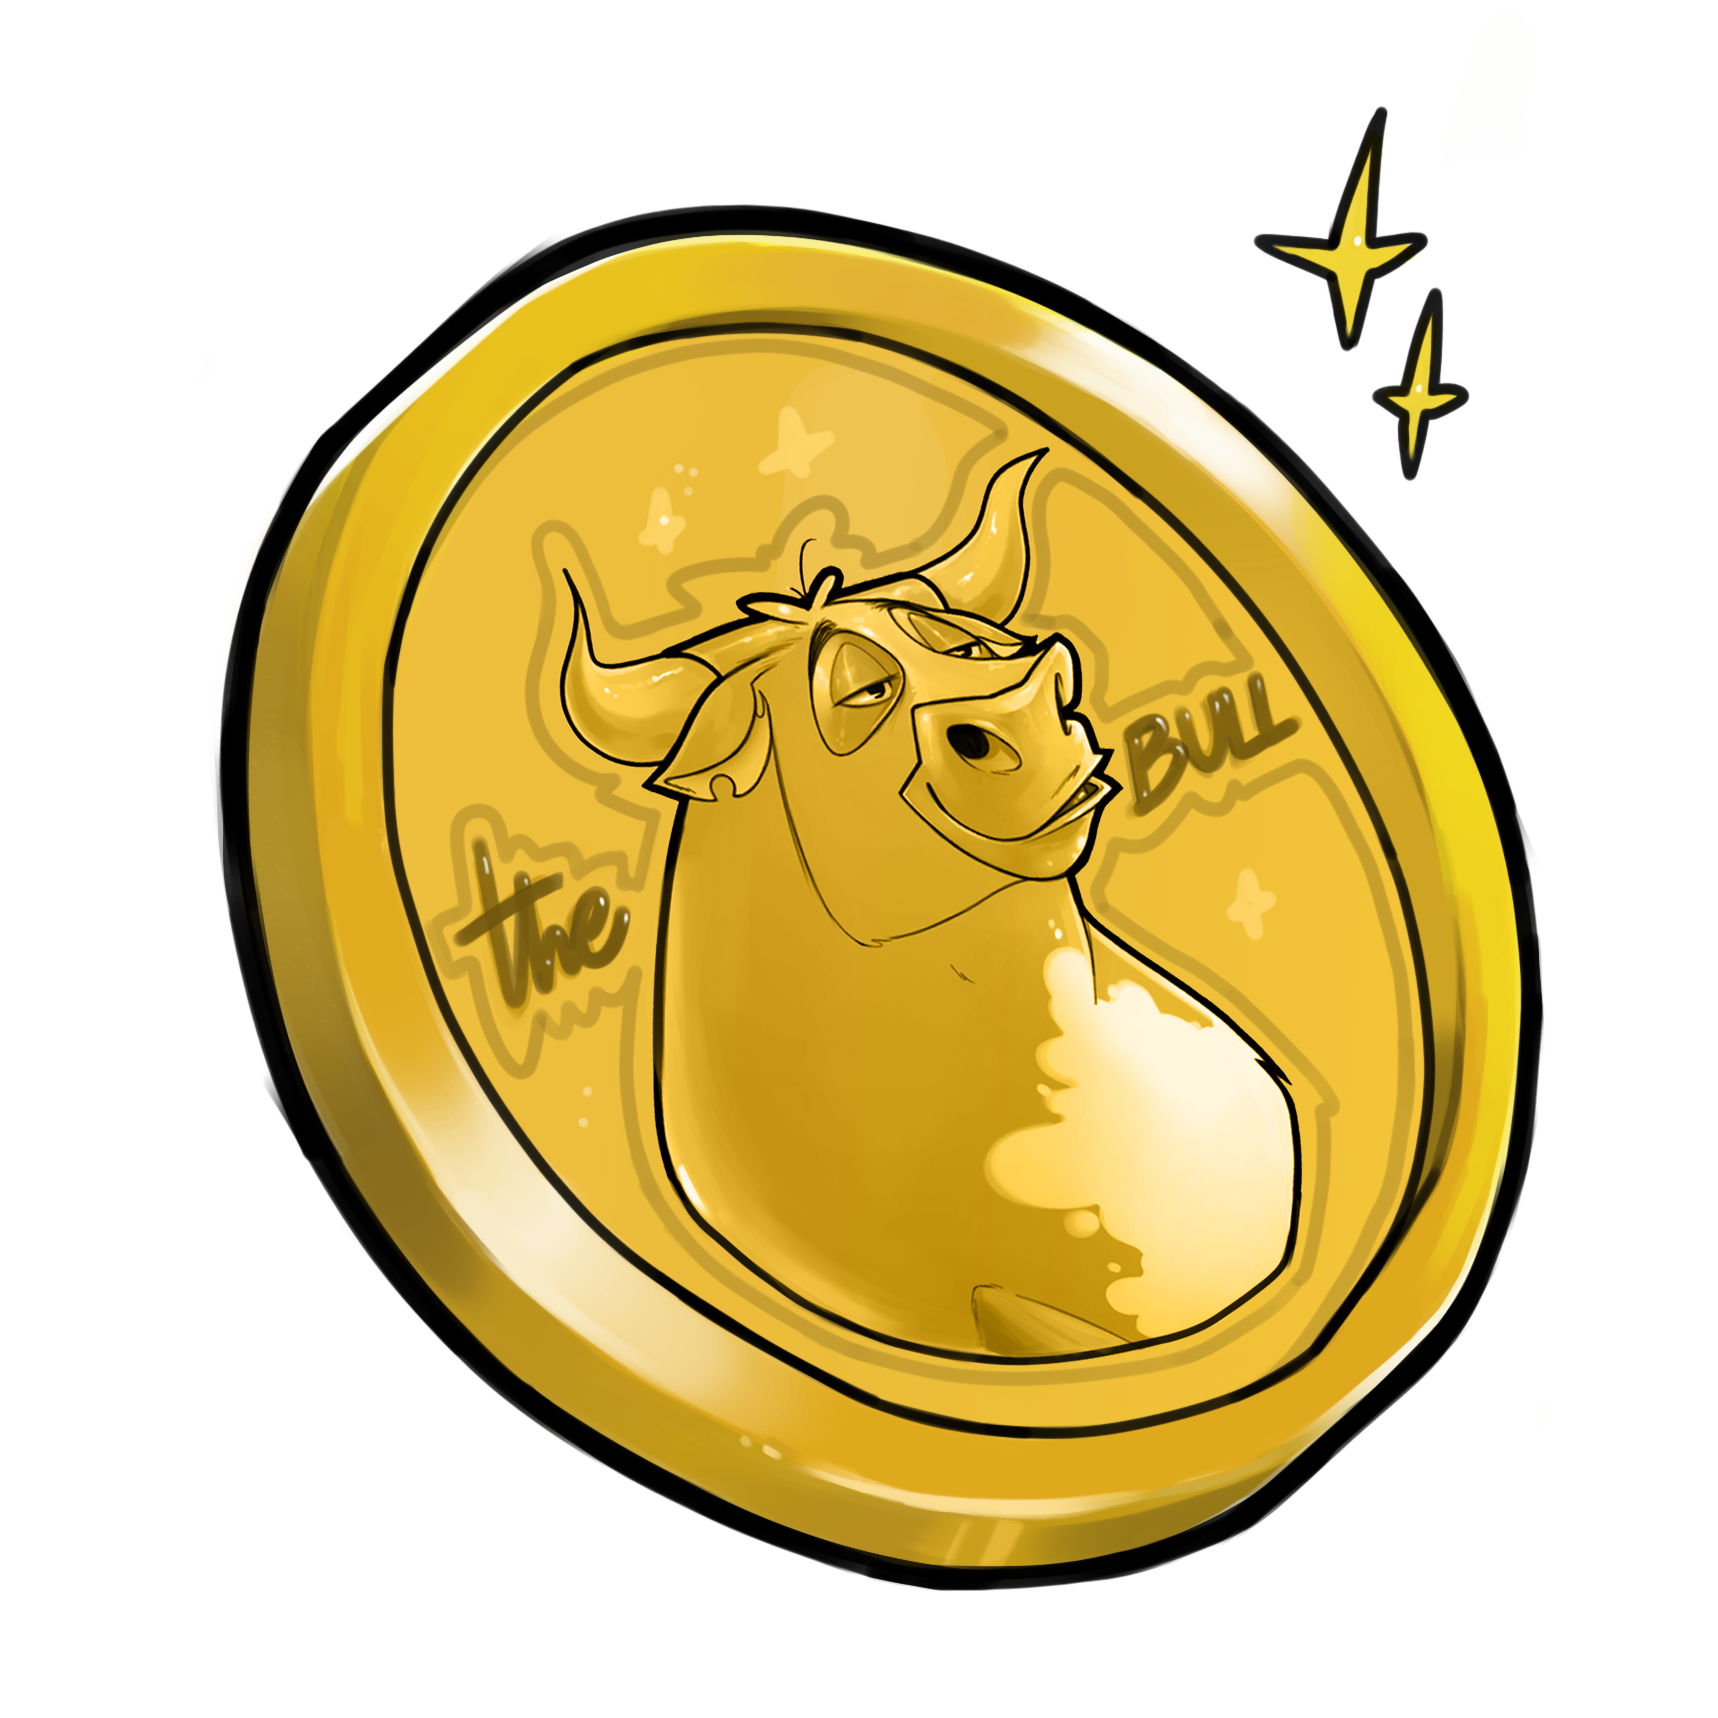 theBULL Coin